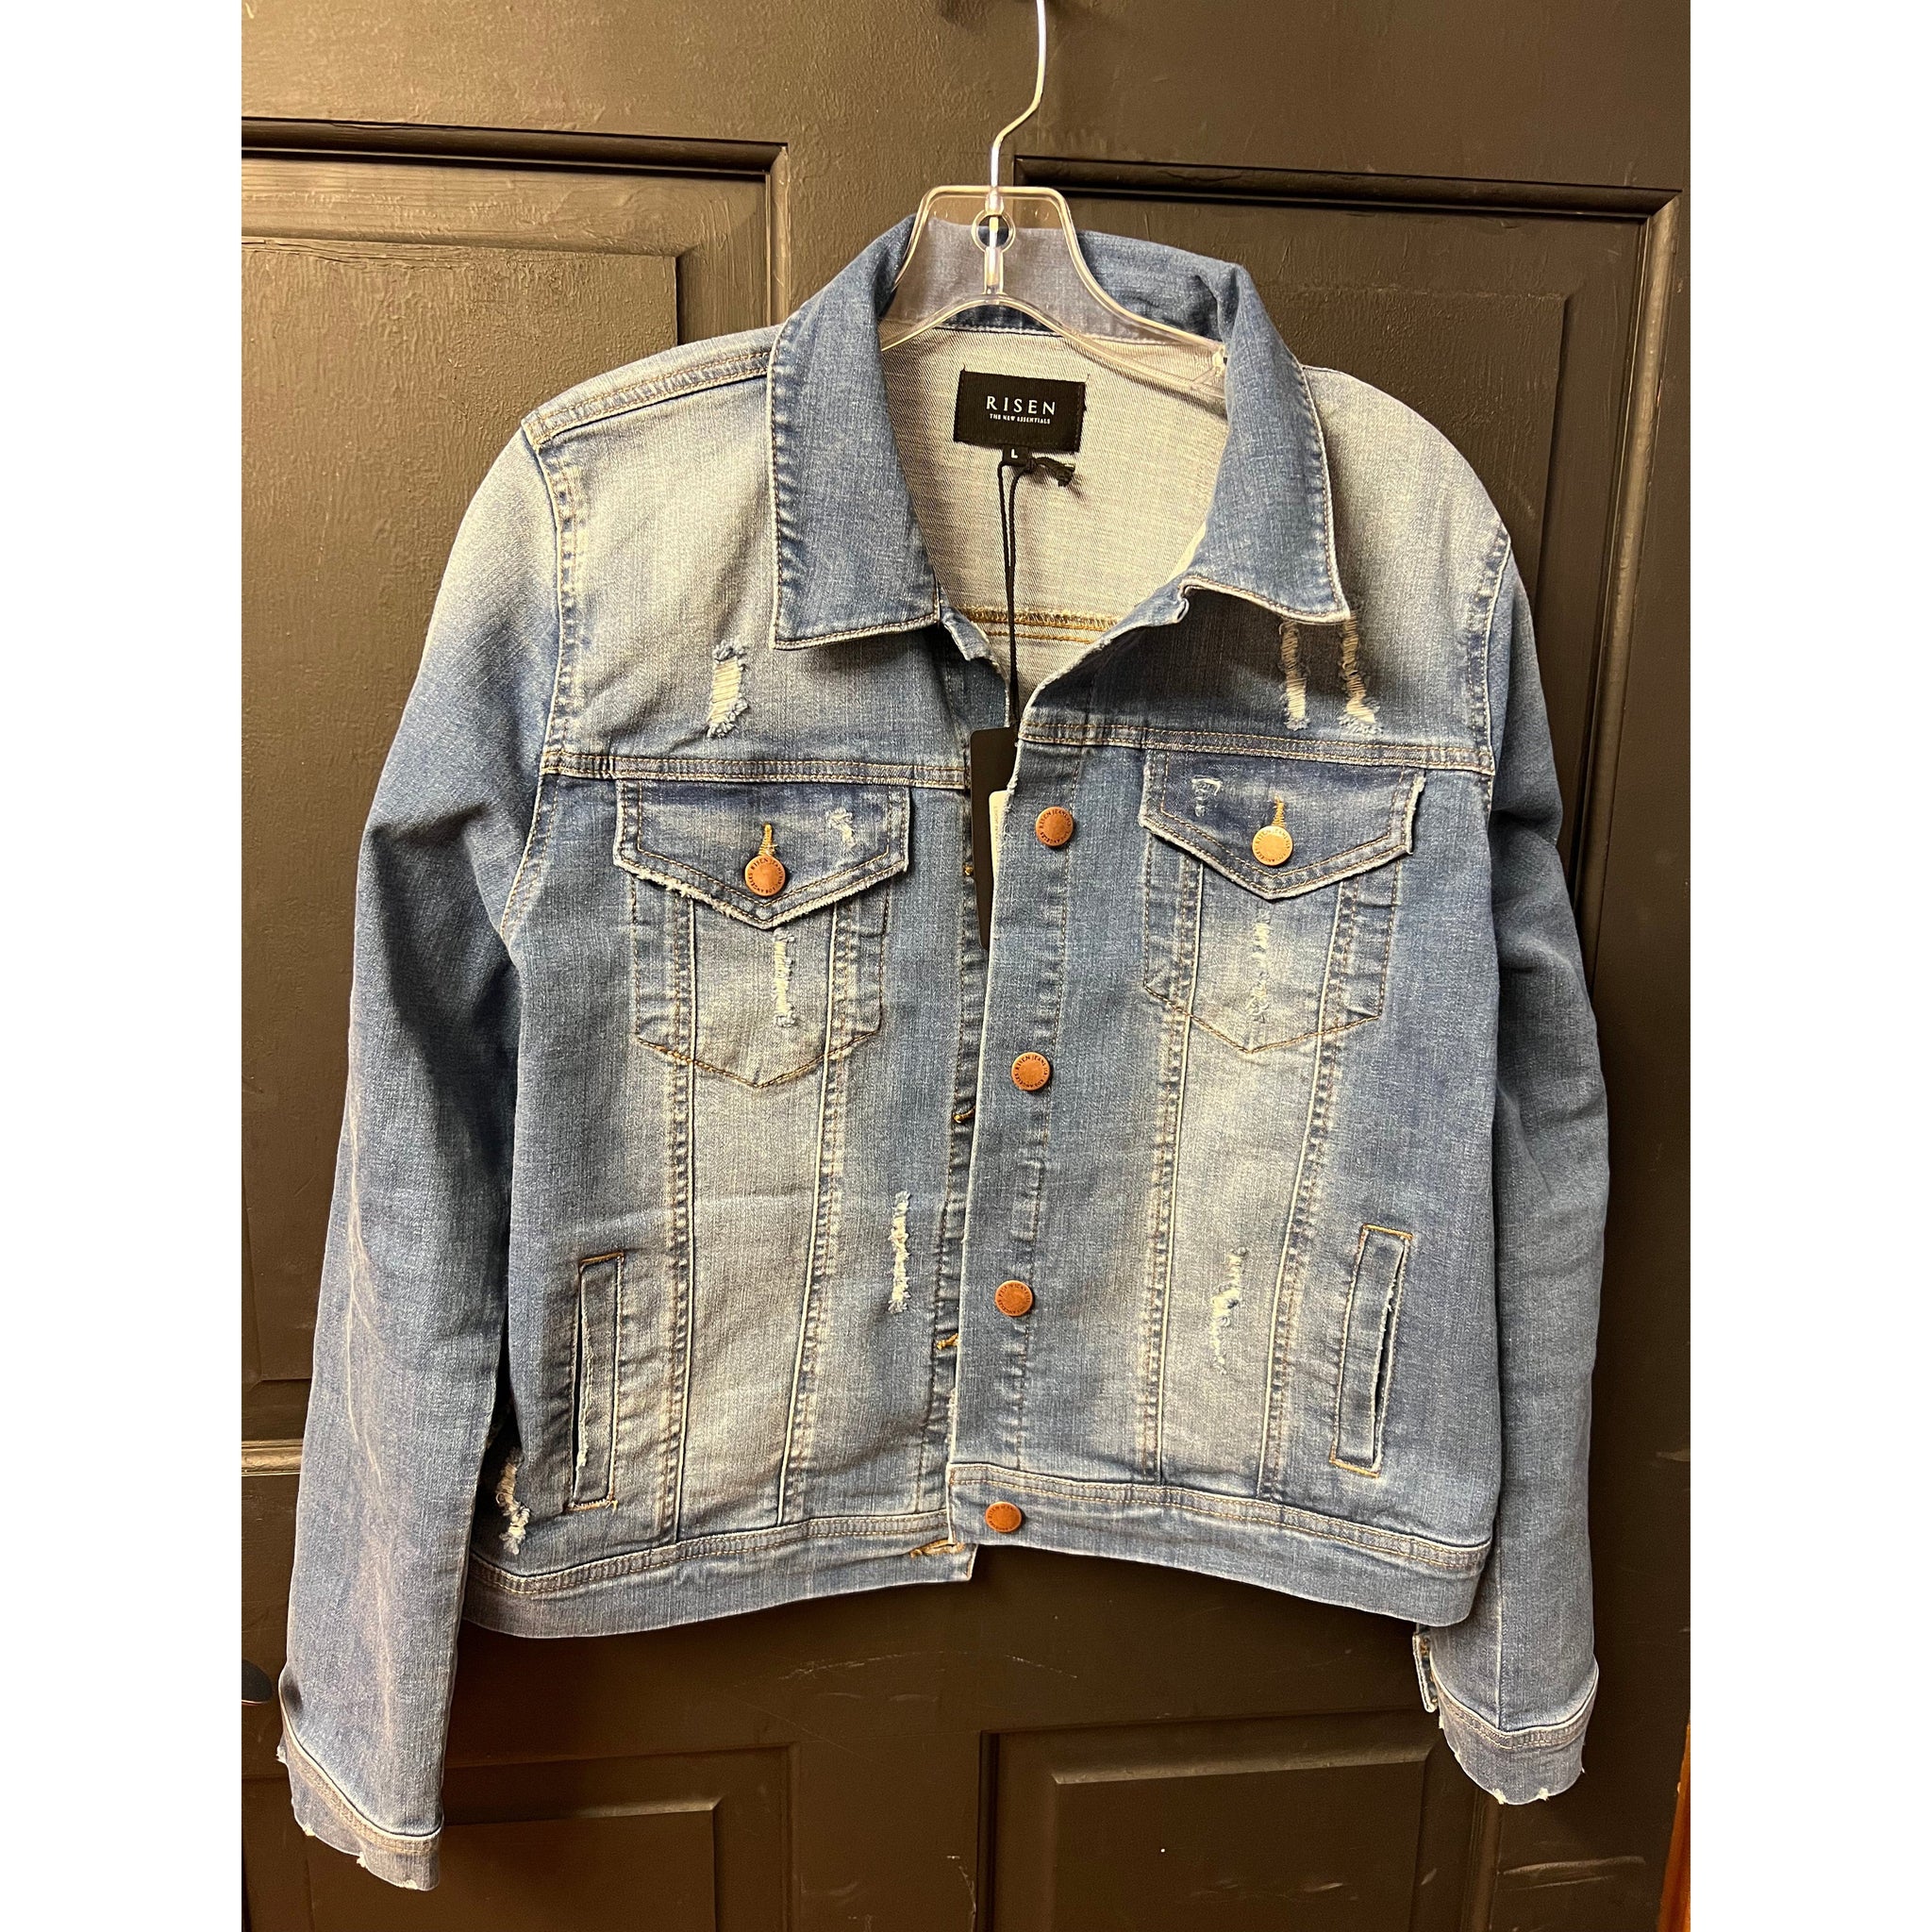 DOWN AT THE RANCH DENIM JACKET-Body and Sol